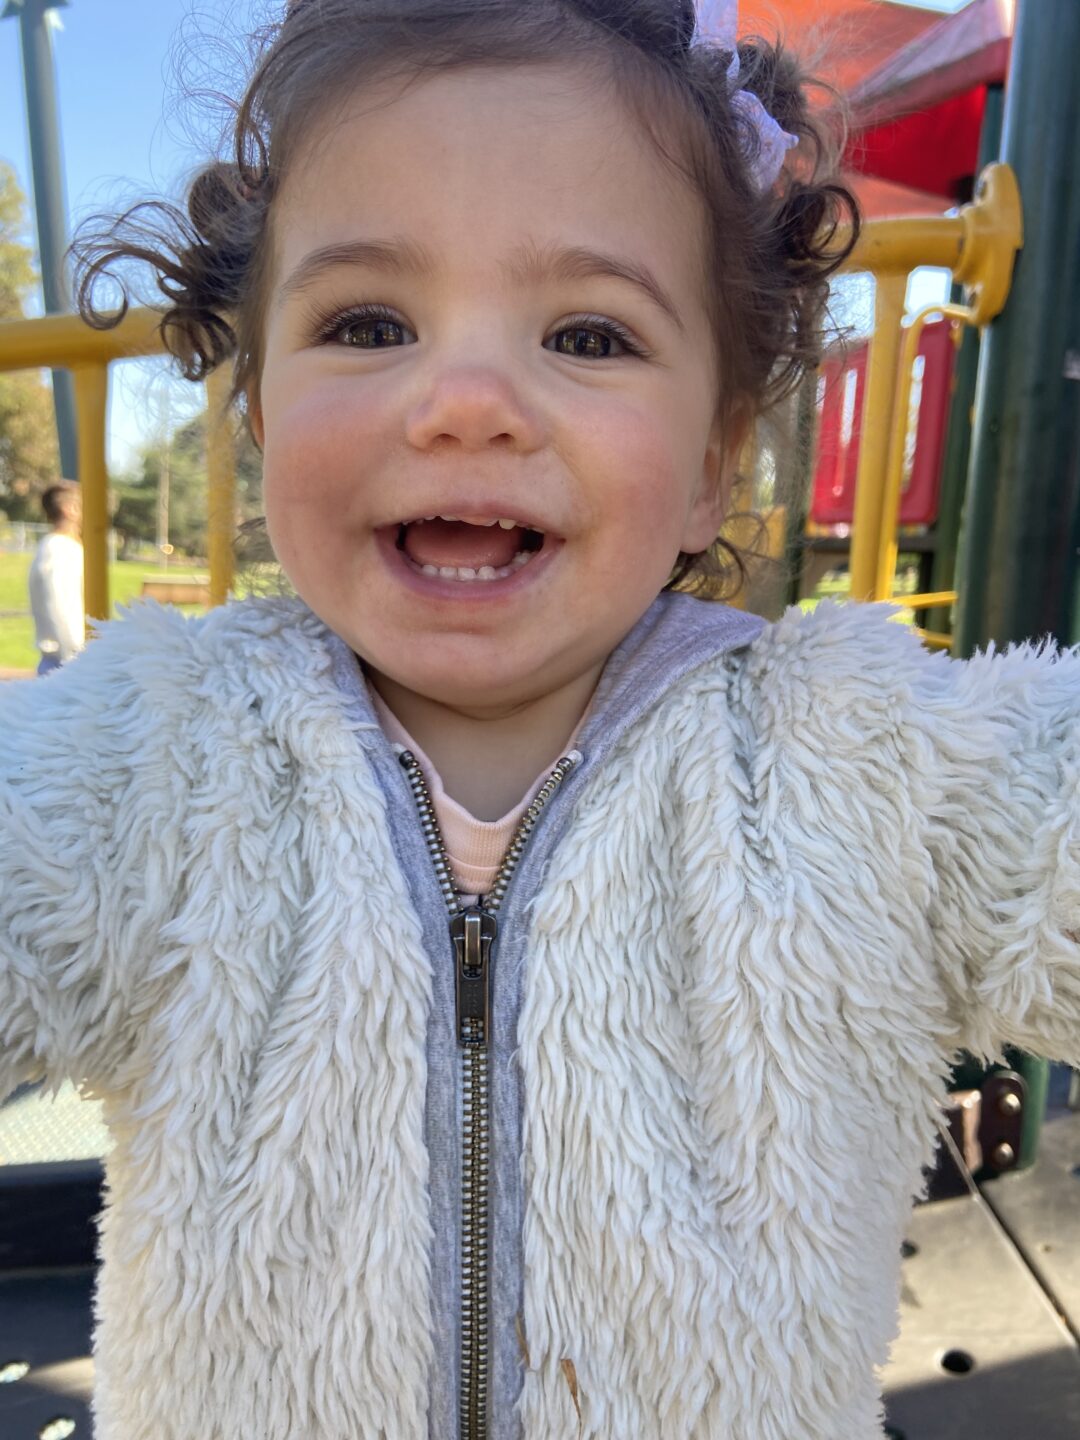 Smiling child at a playground